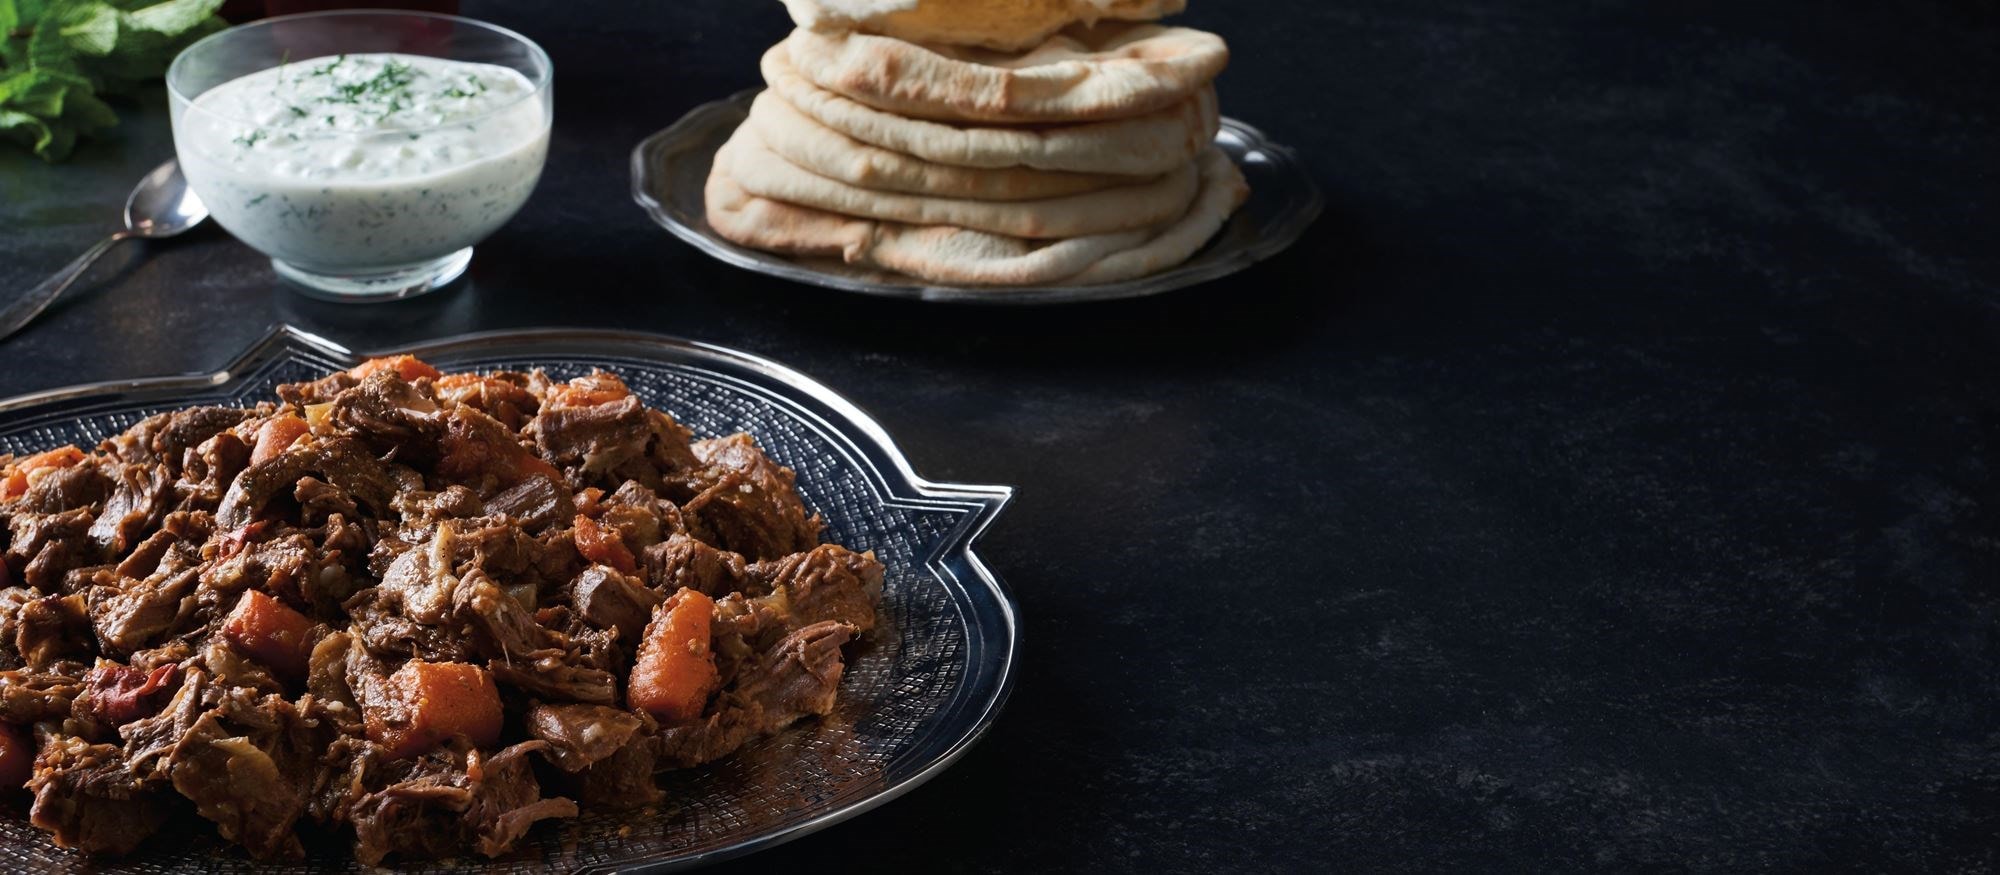 Moroccan braised lamb shoulder recipe from Sub-Zero, Wolf, and Cove